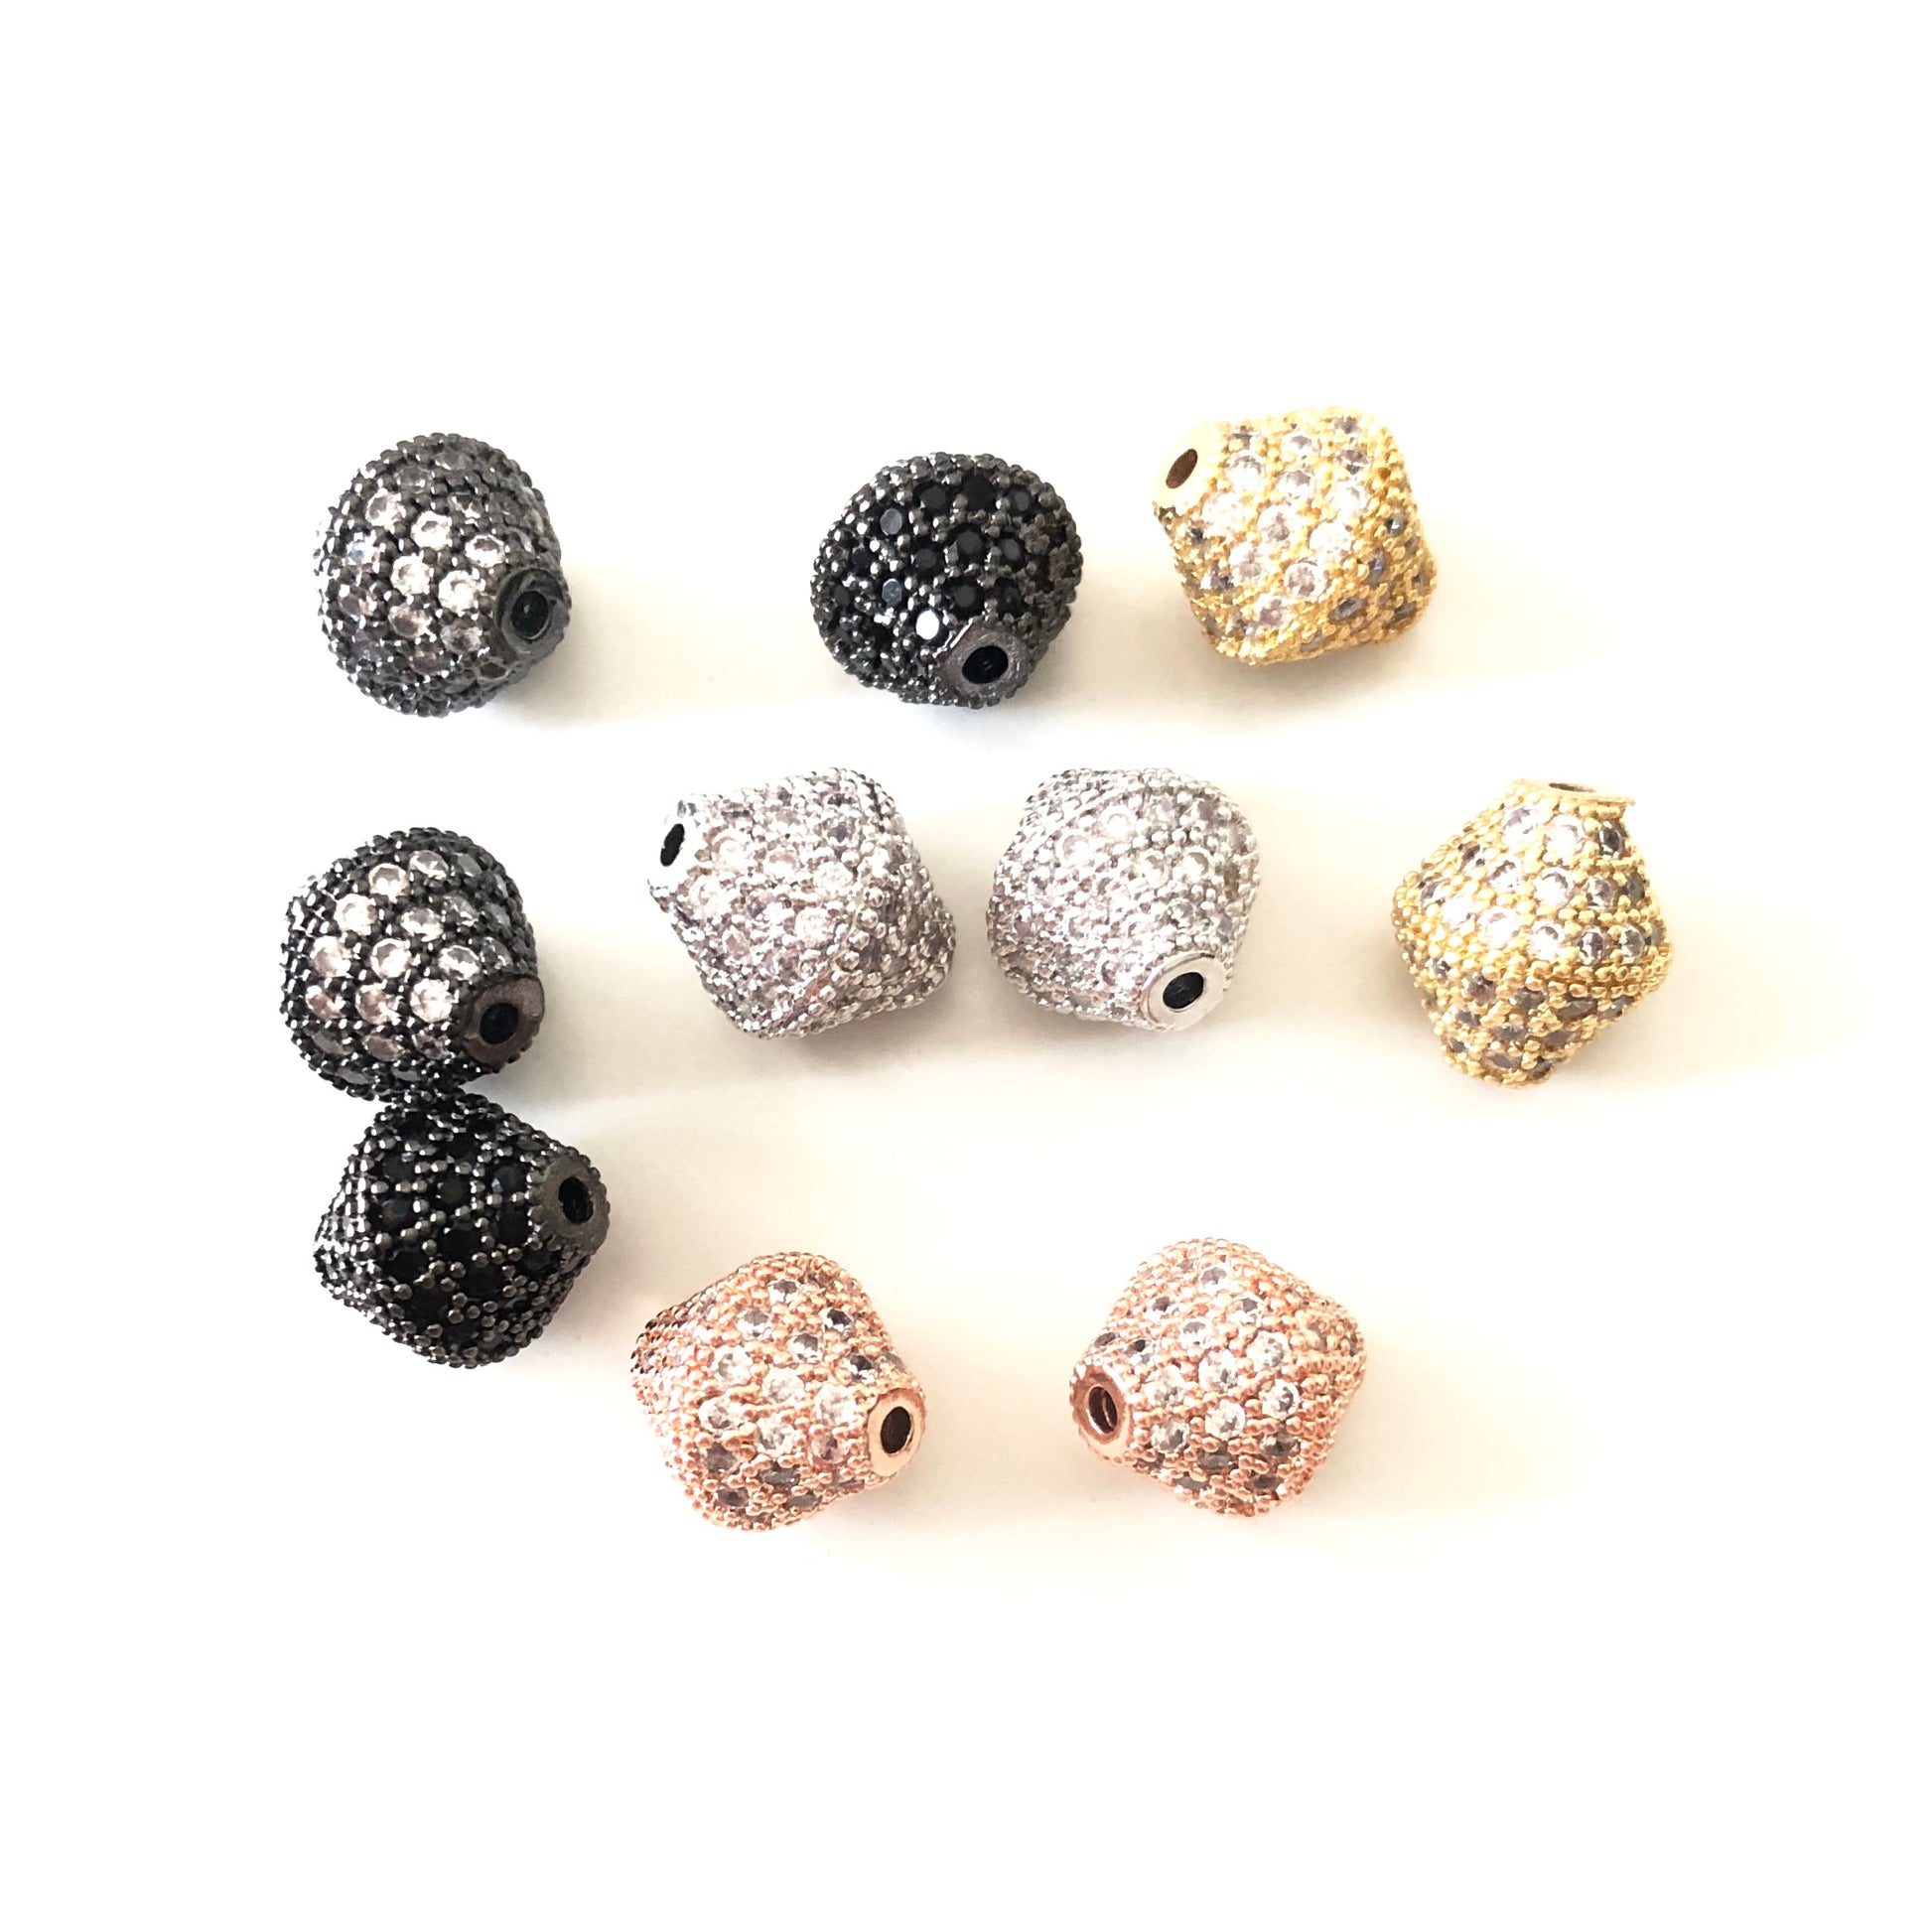 20pcs/lot 10.6*9.4mm CZ Paved Cone Rondelle Spacers Mix Color CZ Paved Spacers Rondelle Beads Charms Beads Beyond